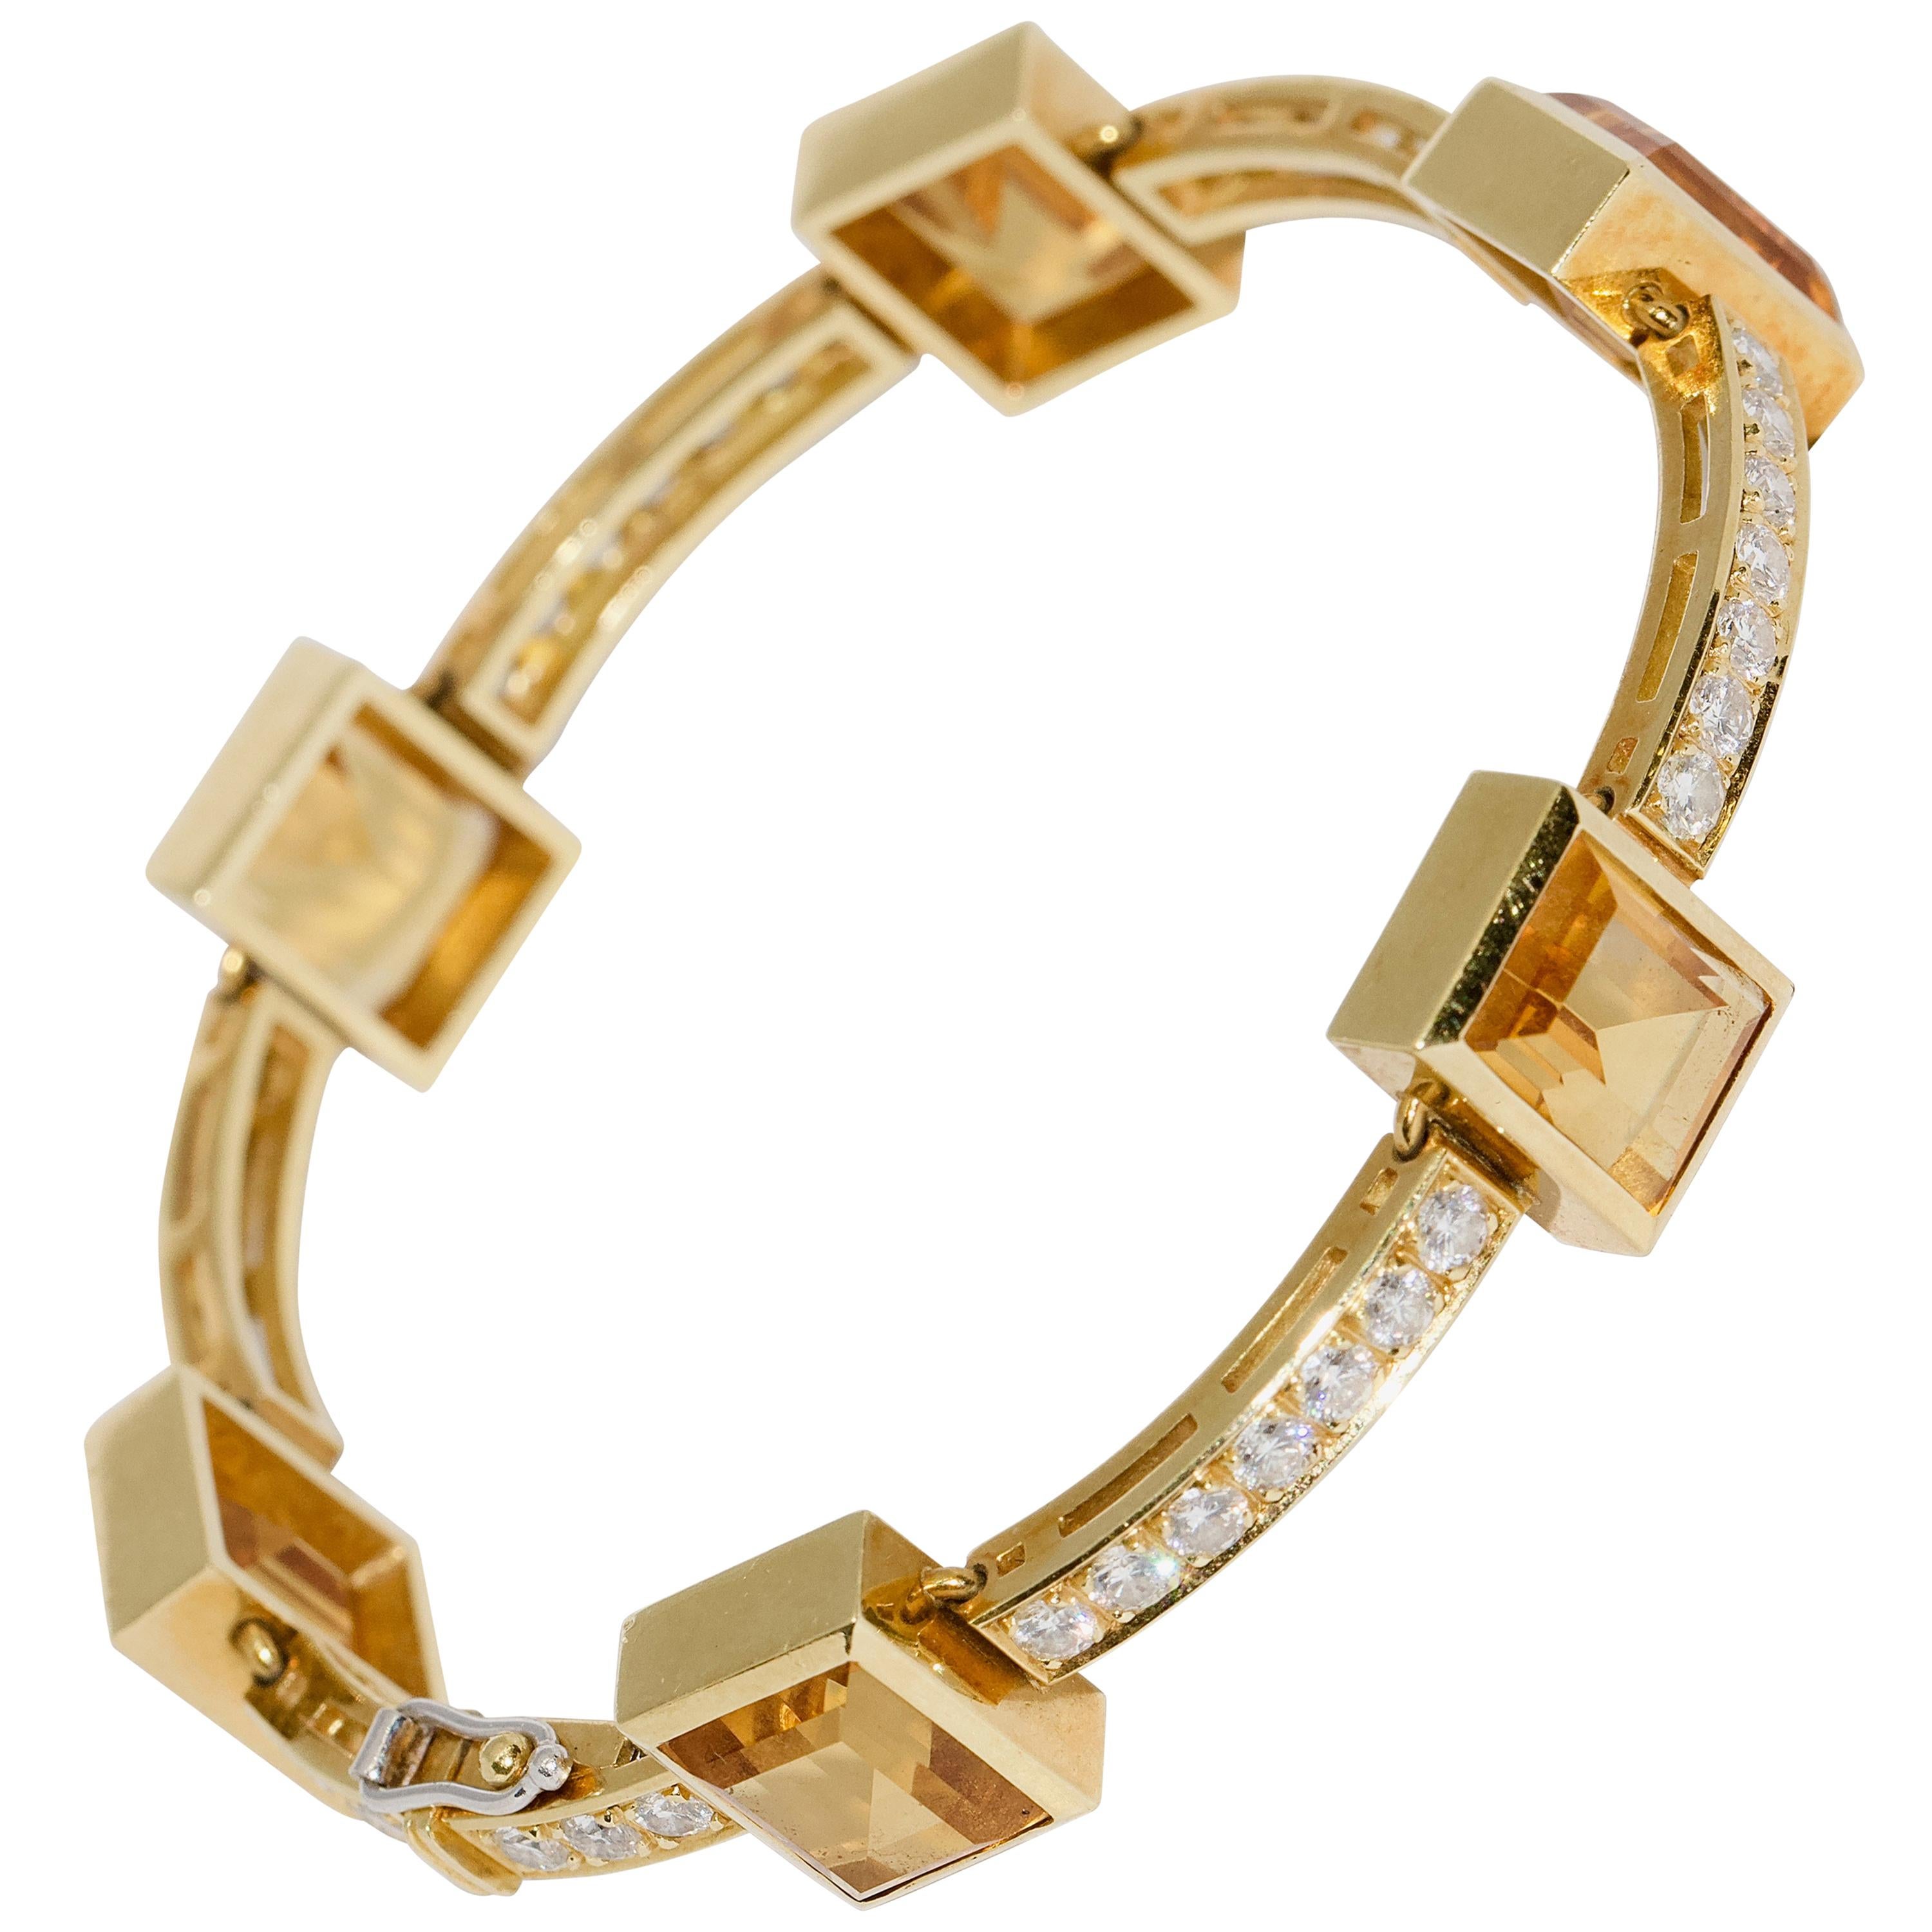 Ladies Bracelet, Bangle in 18 Karat Gold, Set with Citrines and 41 Diamonds For Sale